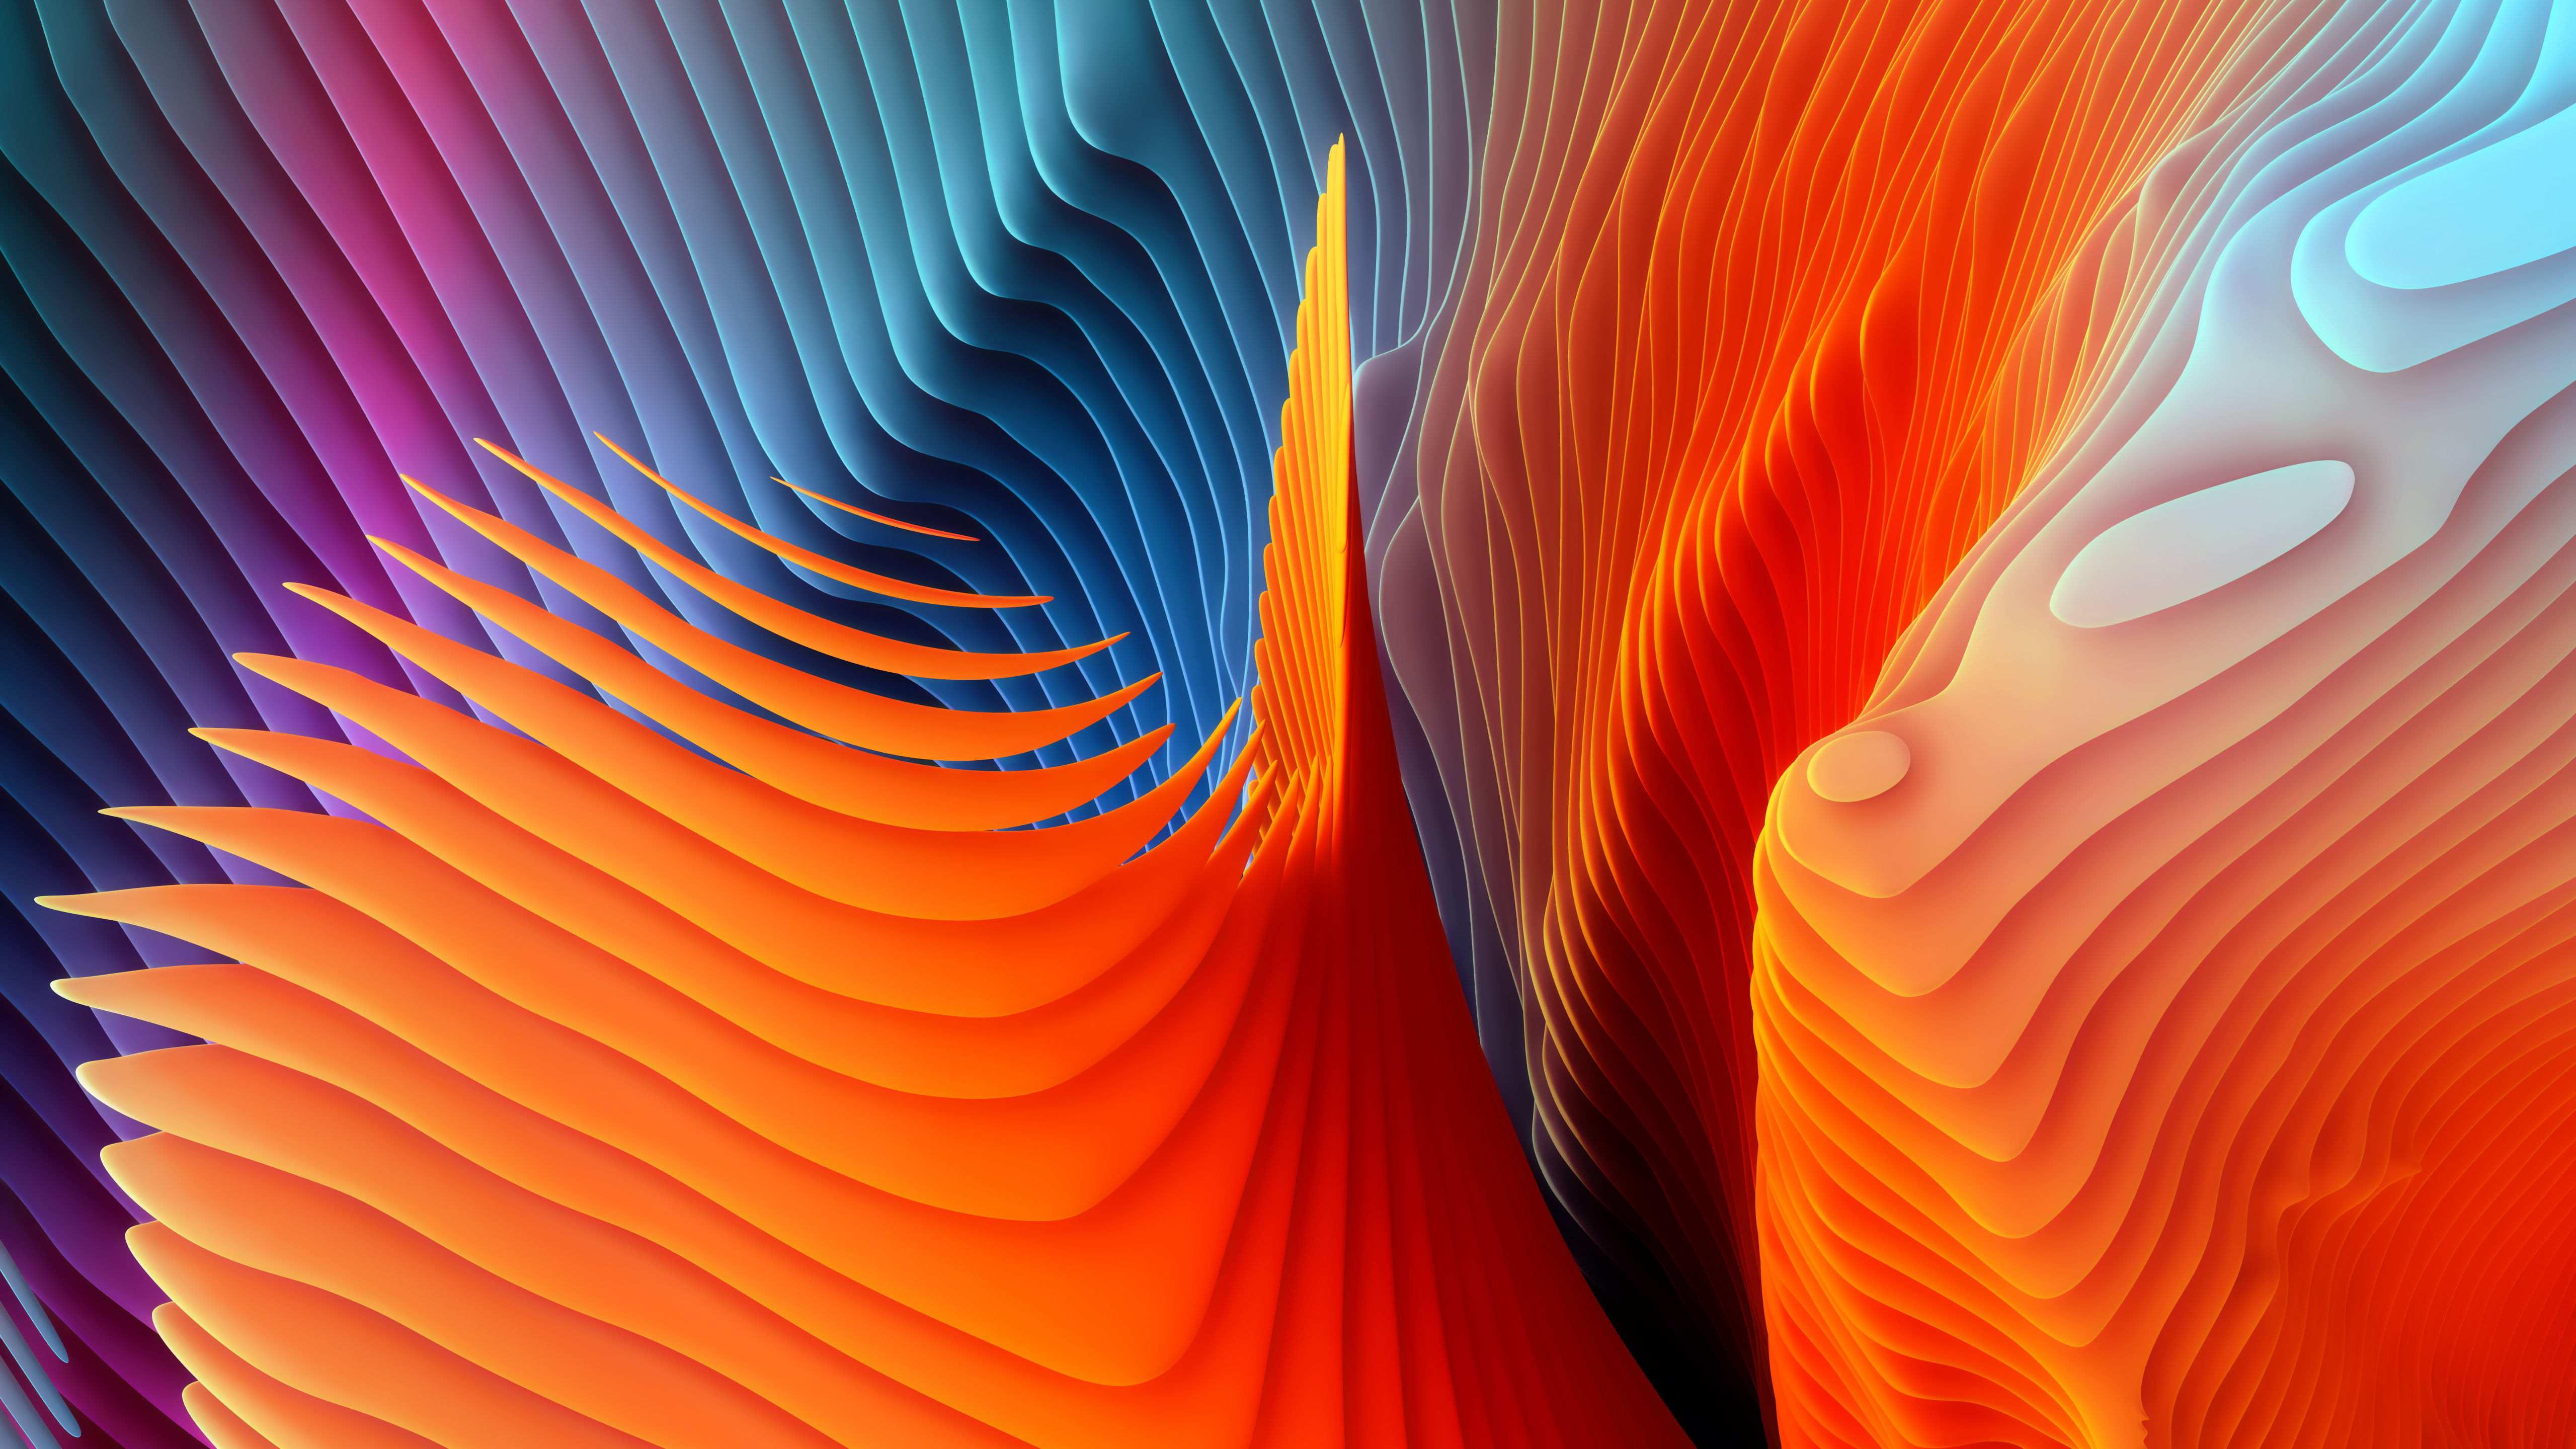 Colorful background Wallpaper 4K, Abstract background, macOS Sierra